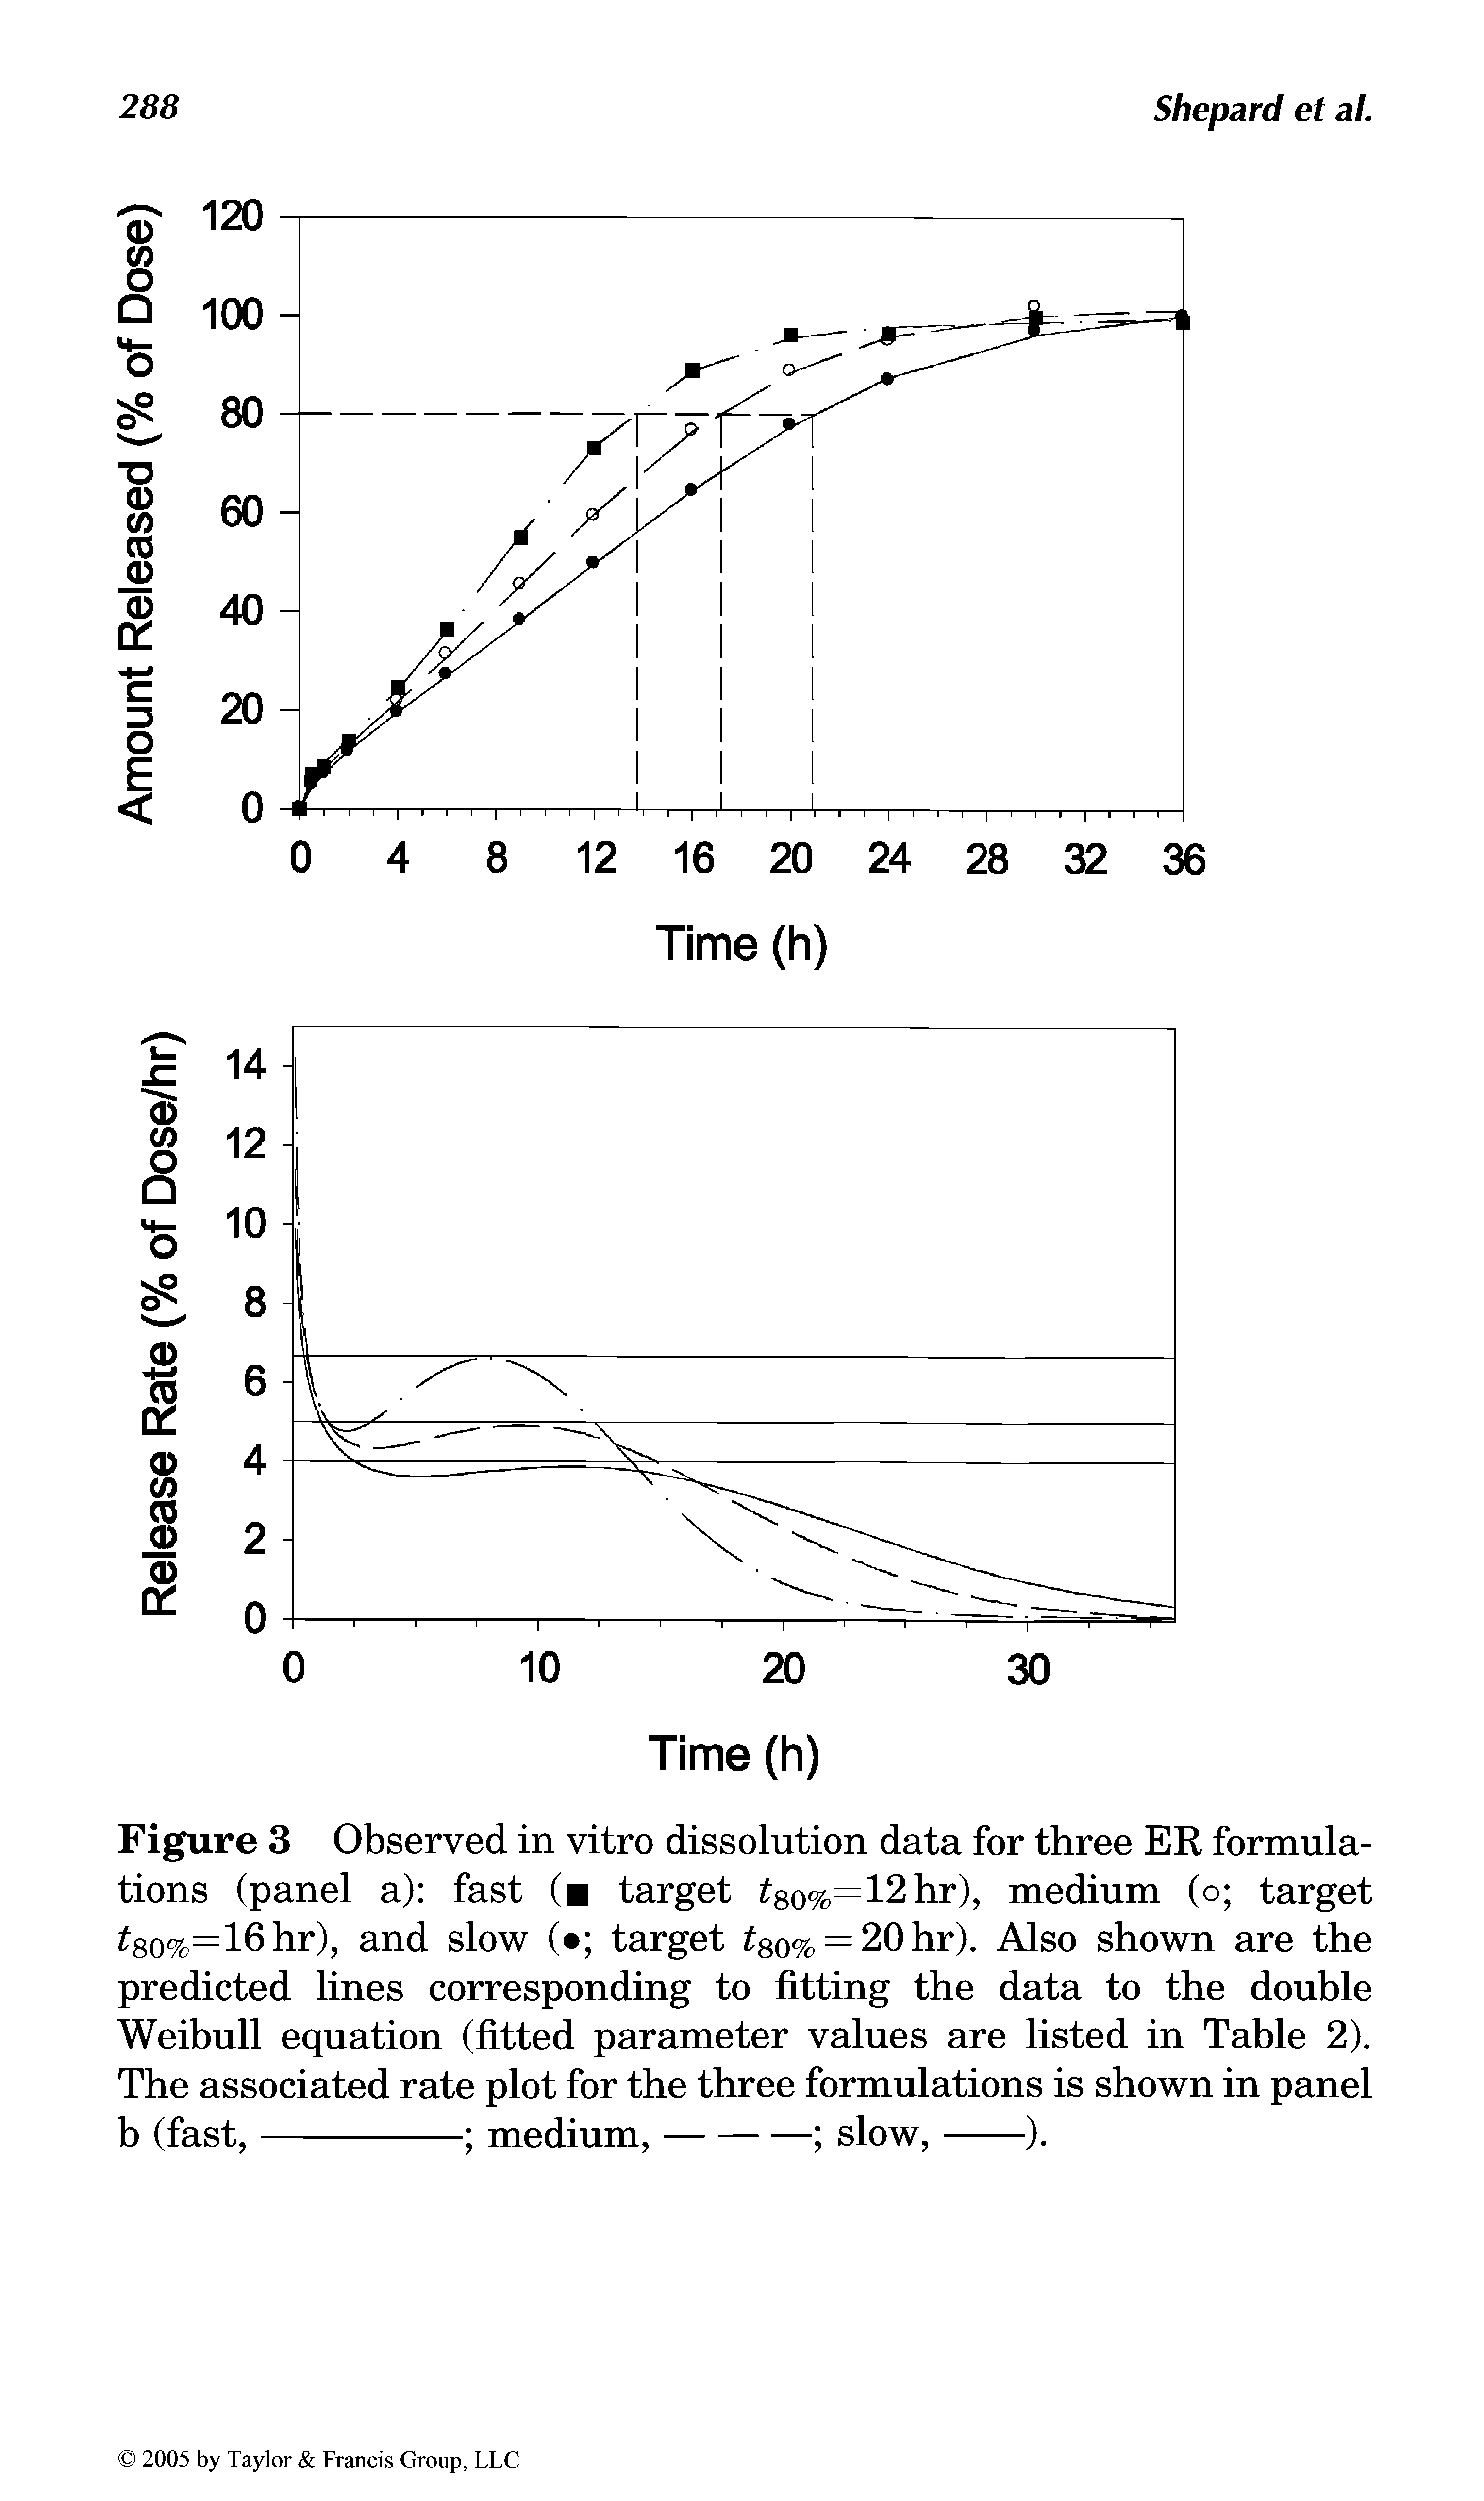 Figure 3 Observed in vitro dissolution data for three ER formulations (panel a) fast ( target 80%=12hr), medium (o target 80%=lbhr), and slow ( target 80% = 20hr). Also shown are the predicted lines corresponding to fitting the data to the double Weibull equation (fitted parameter values are listed in Table 2). The associated rate plot for the three formulations is shown in panel b (fast,--------- medium,--------- slow,---).